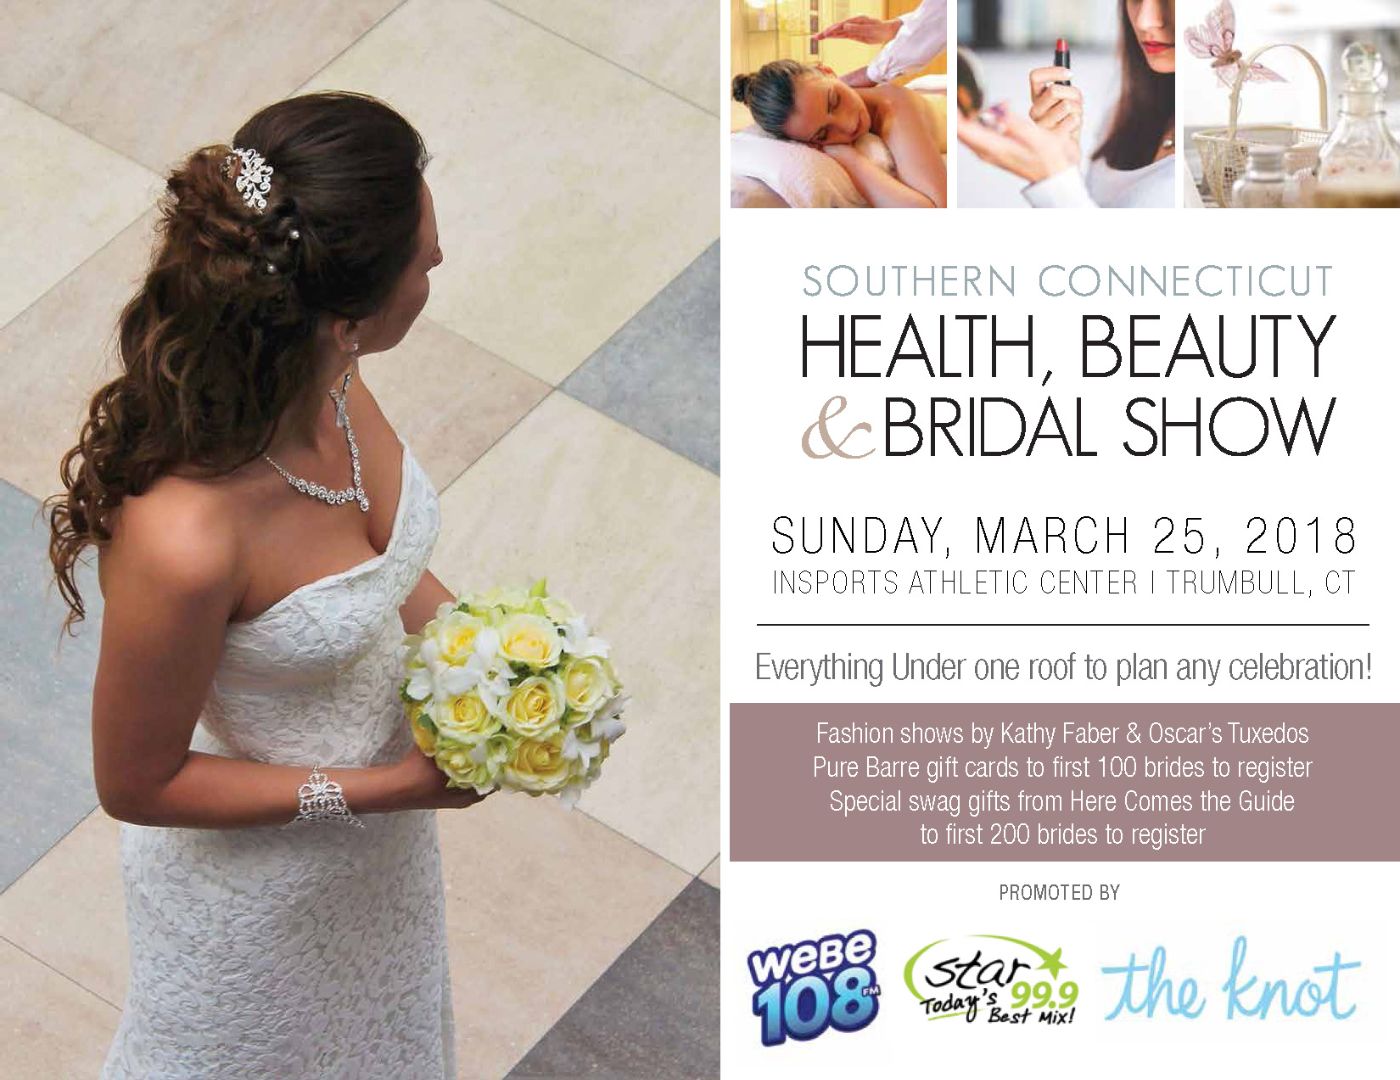 Southern Connecticut Health, Beauty, and Bridal Show